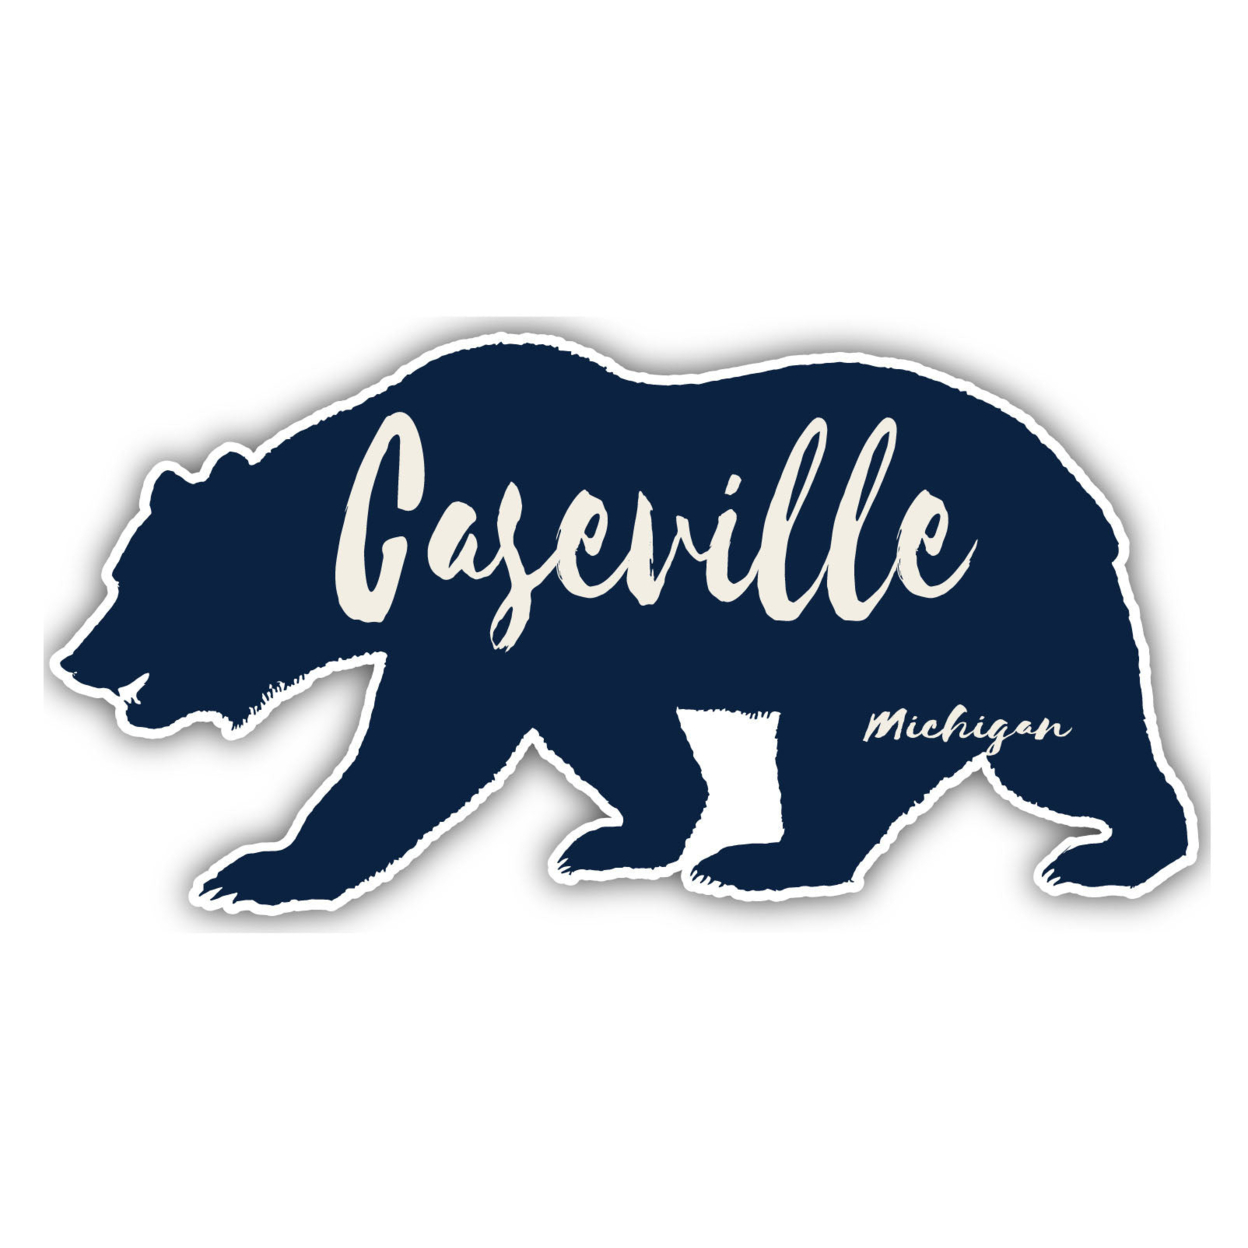 Caseville Michigan Souvenir Decorative Stickers (Choose Theme And Size) - Single Unit, 6-Inch, Great Outdoors